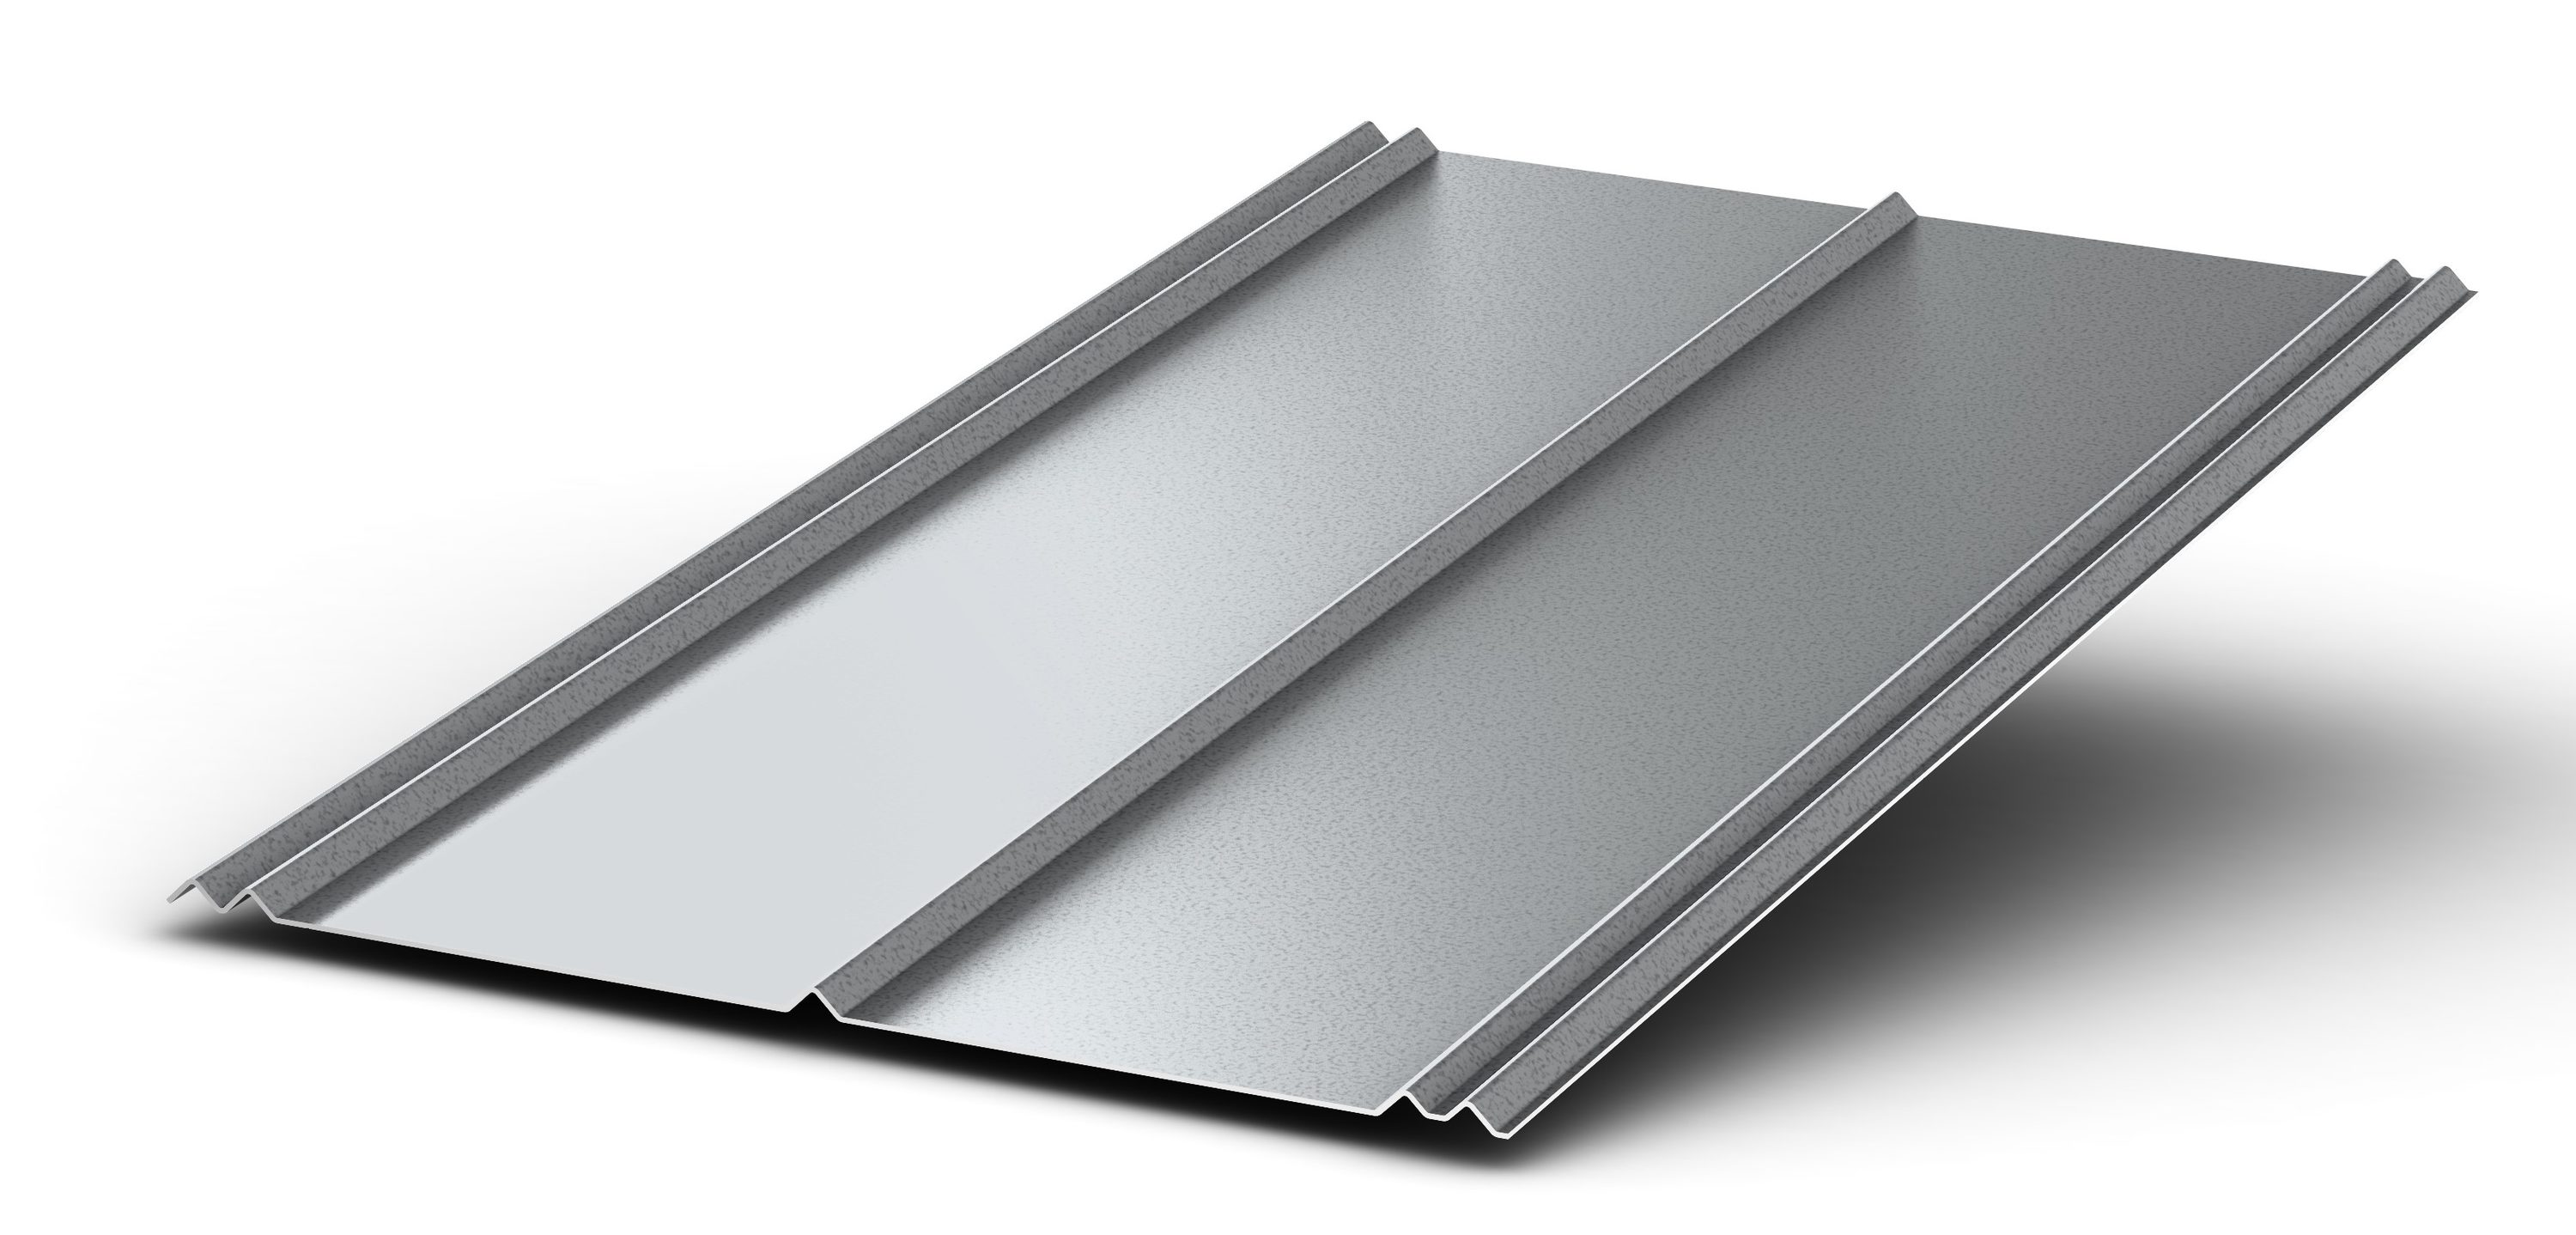 1no 6ft x 2ft wide Galvanised Corrugated Roof Sheet 200 £16.00 each @ J  Sharples